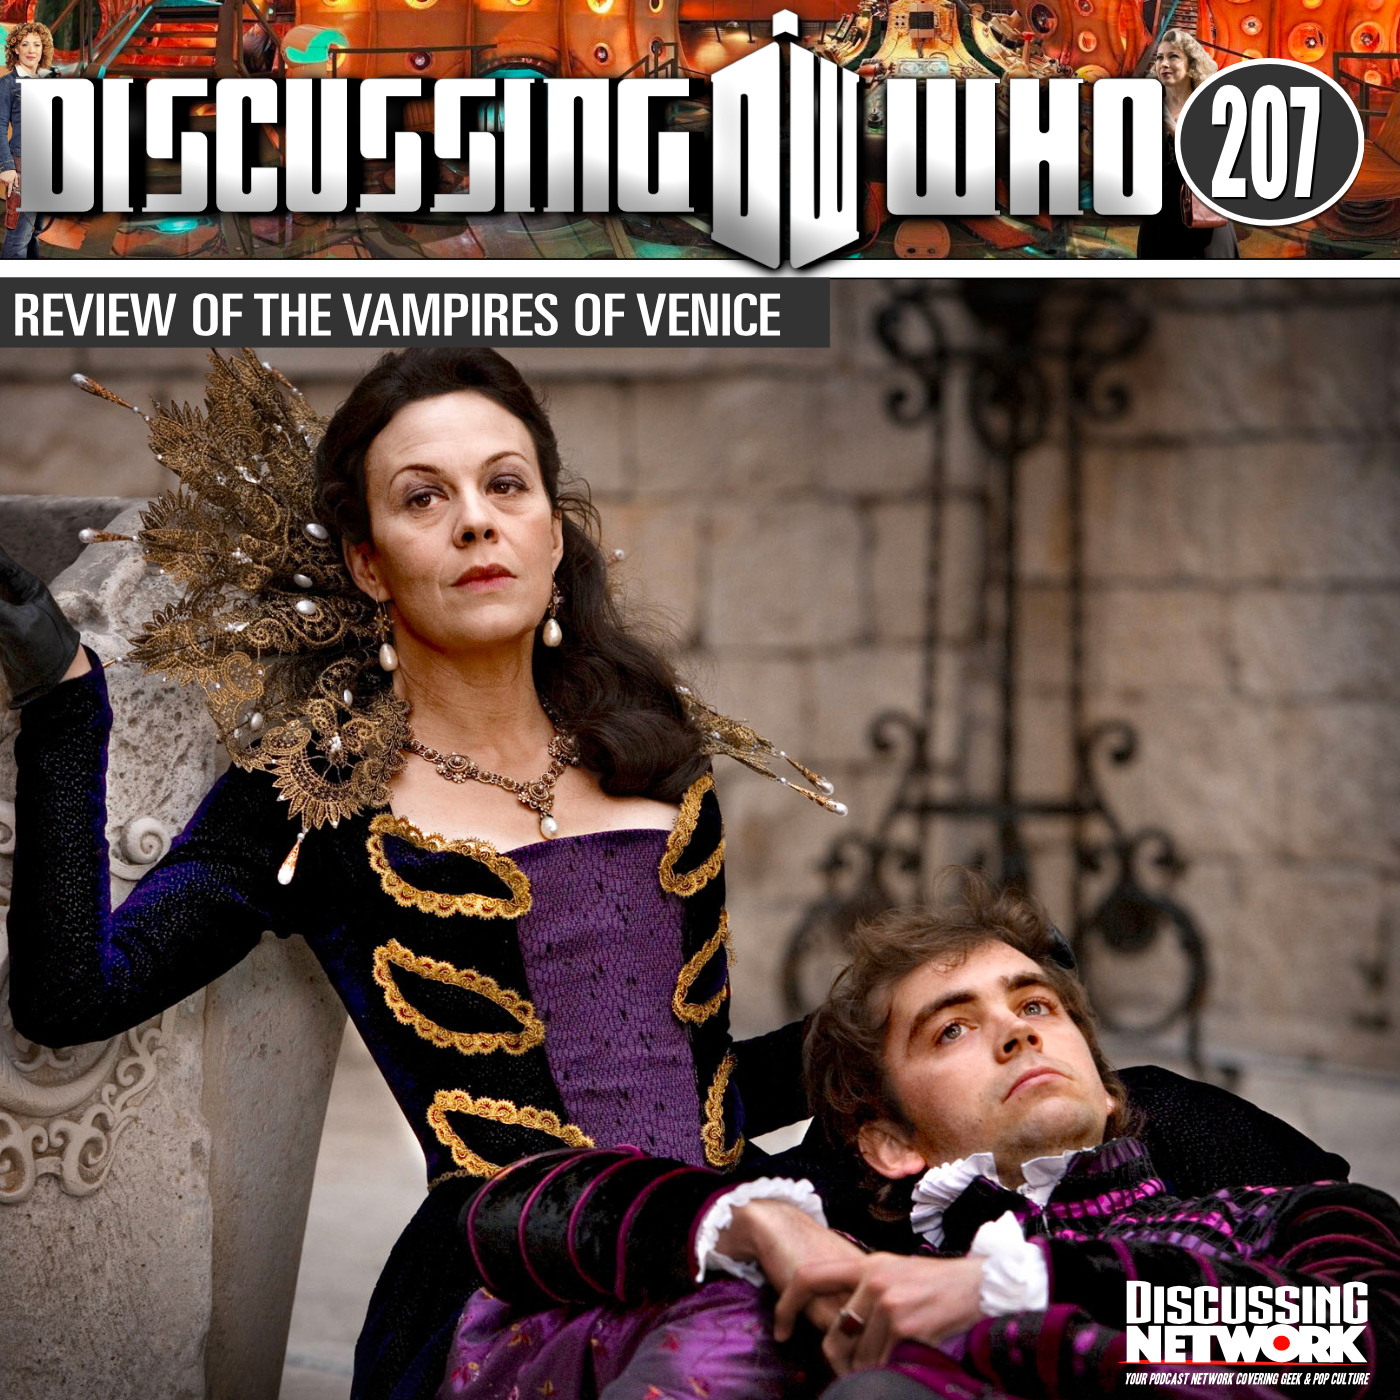 Review of the Vampires of Venice, Doctor Who Series 5 Episode 6